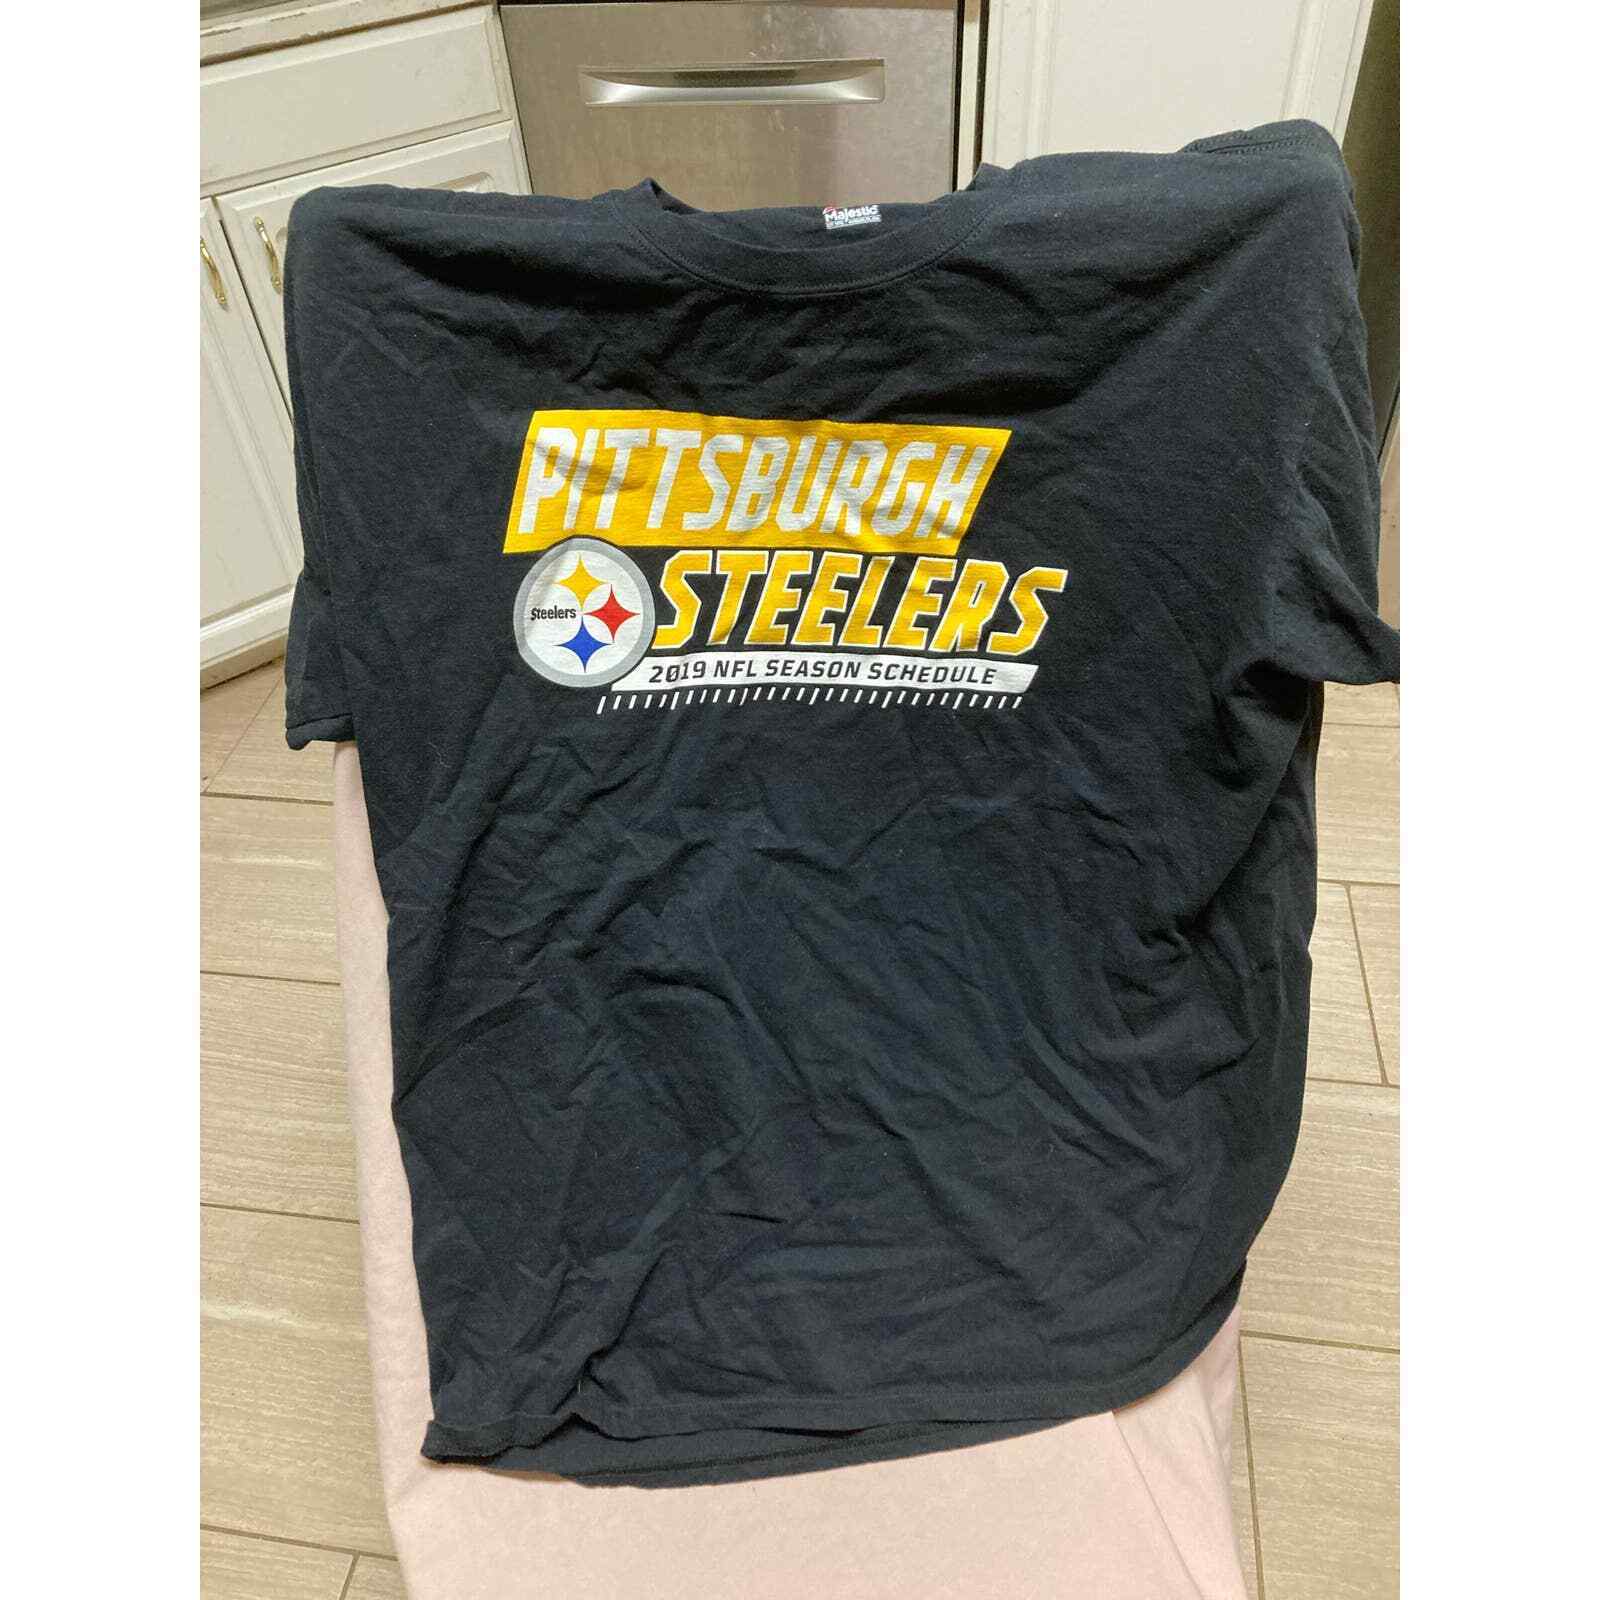 Primary image for Majestic Pittsburgh Steelers 2019 NFL Season Schedule Shirt Size XL